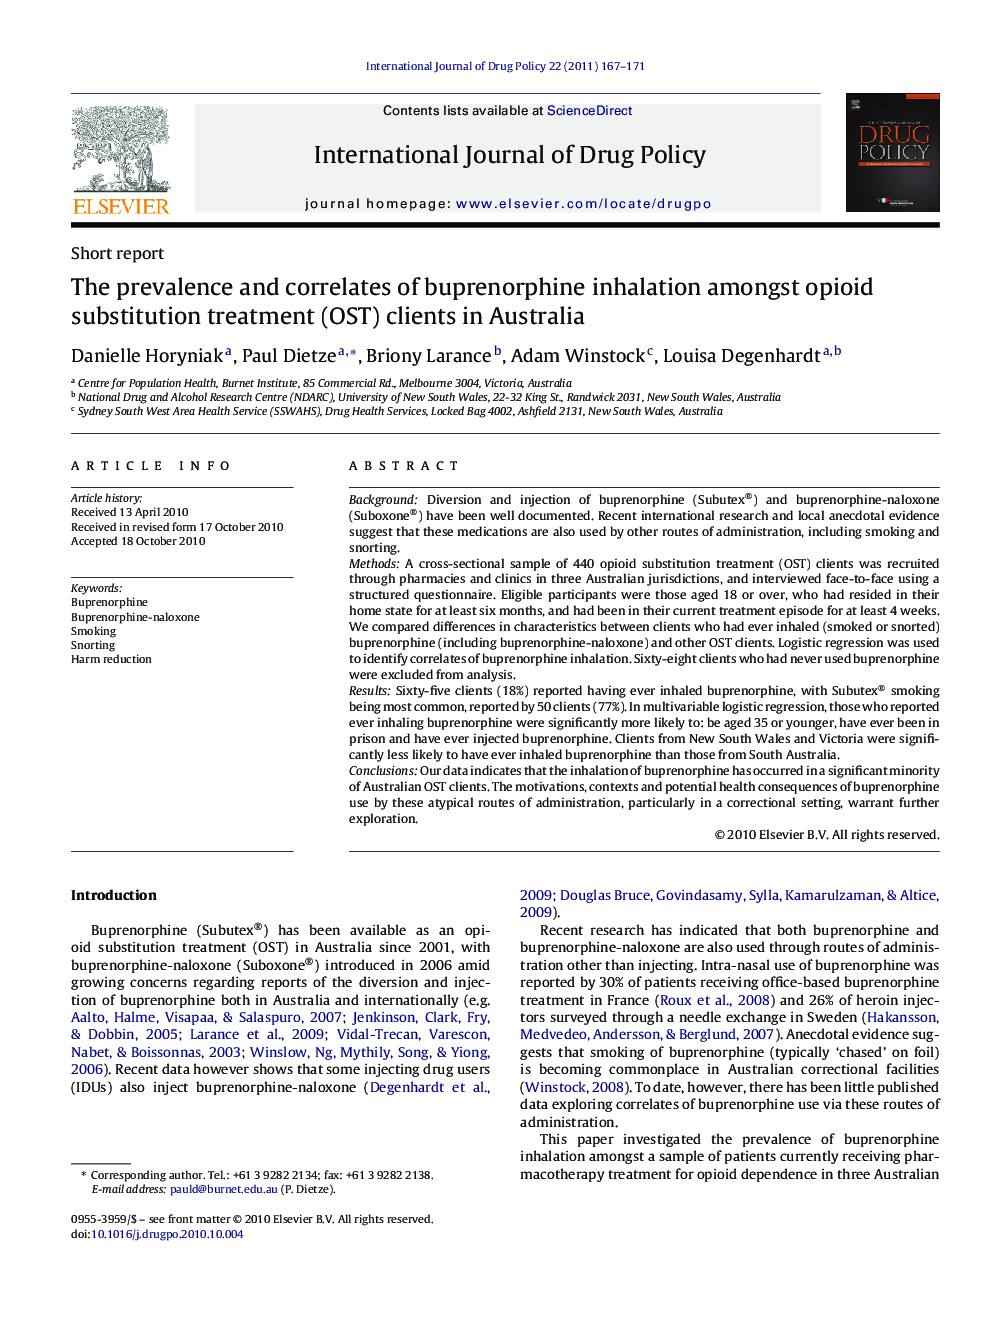 The prevalence and correlates of buprenorphine inhalation amongst opioid substitution treatment (OST) clients in Australia